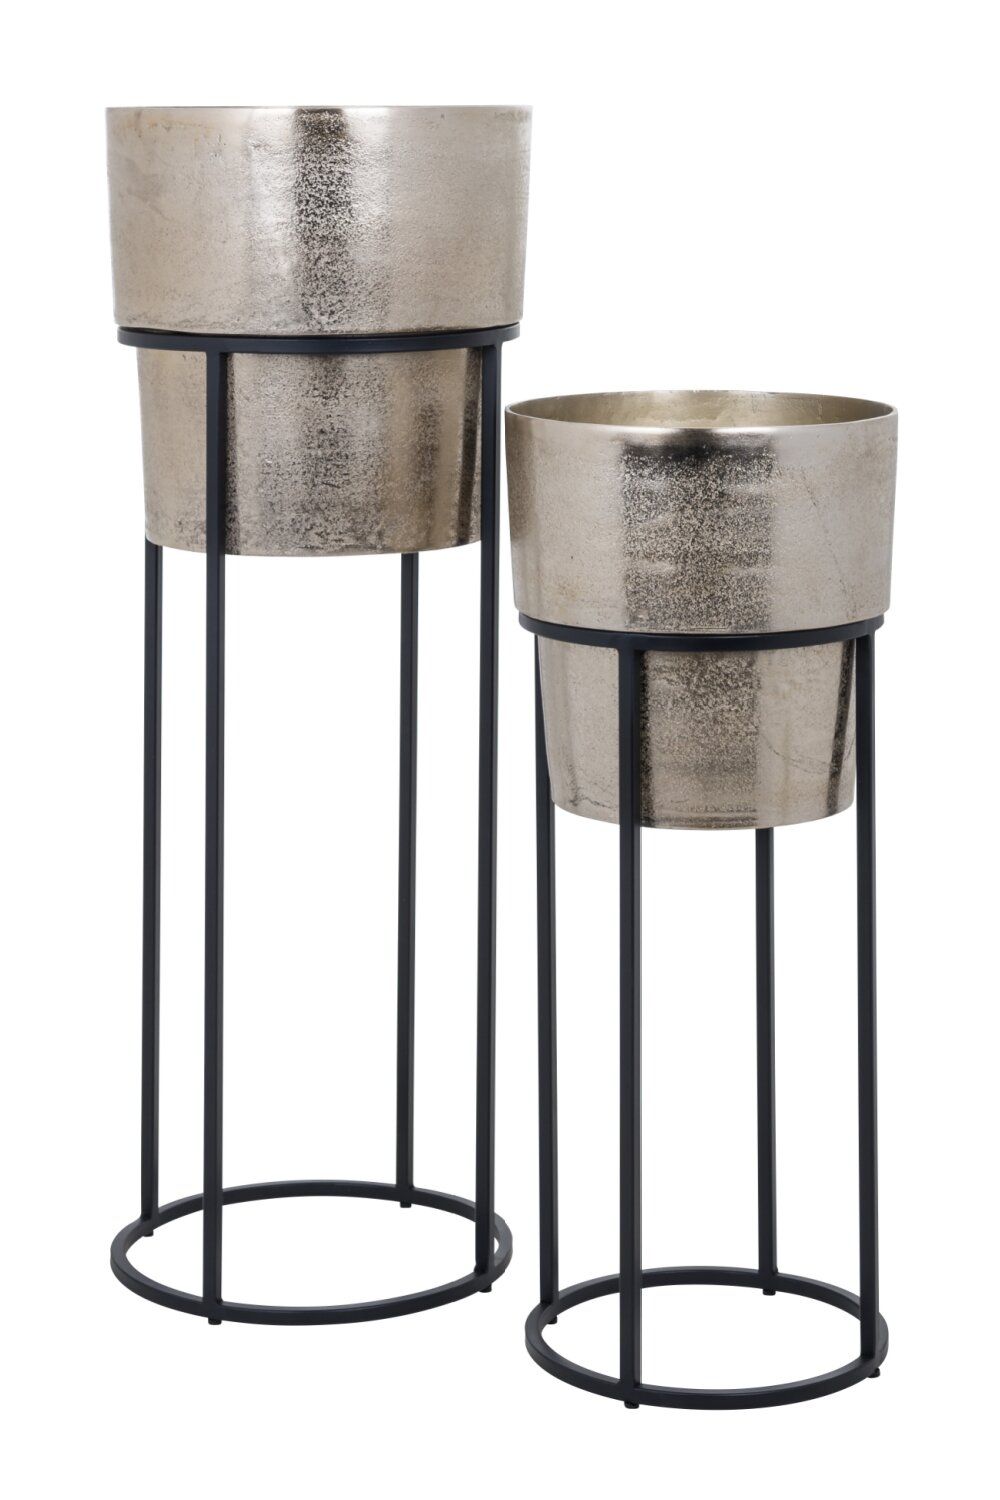 Oroa Round Pedestal Plant Stand | Wayfair Within Iron Base Plant Stands (View 11 of 15)